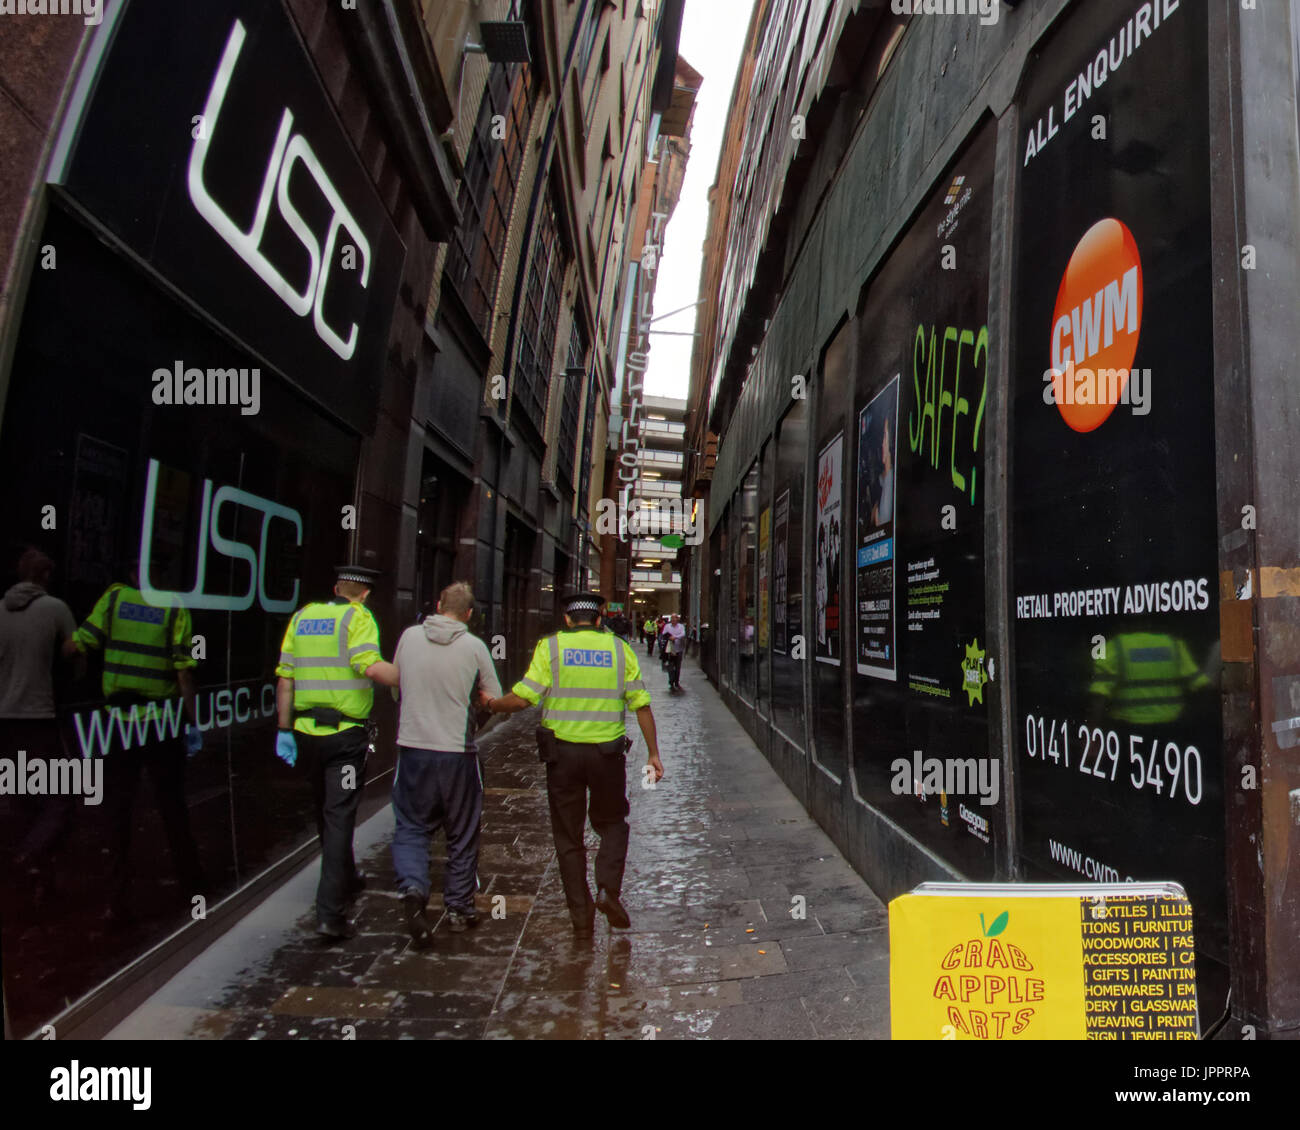 perspective suspect in cuffs being led down an alley by police in high viz jackets surrounded by signs Stock Photo